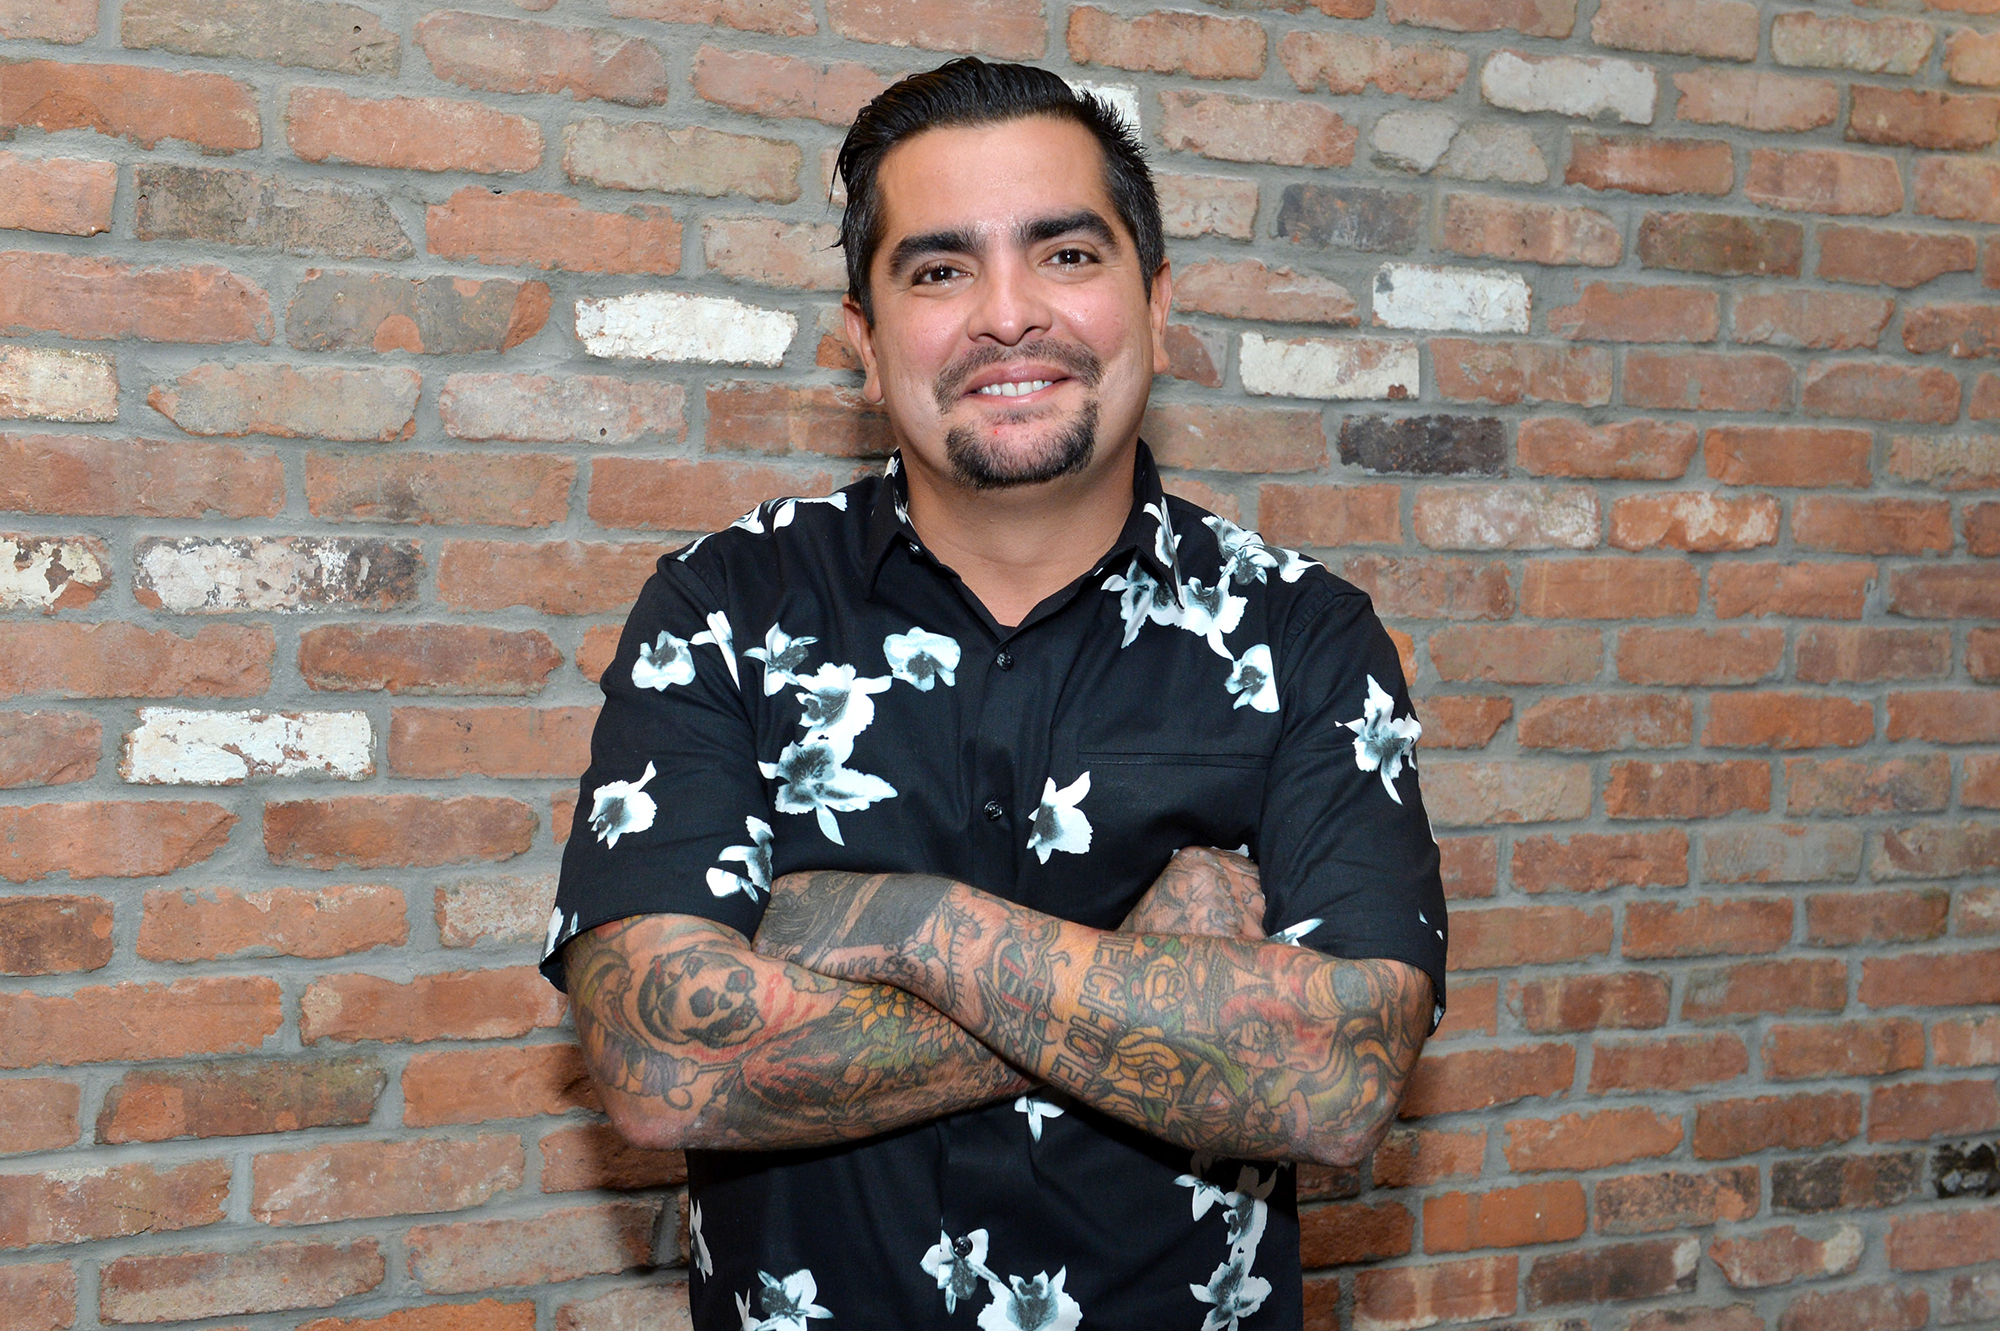 Take a tattoo for the team -- An interview with Aaron Sanchez